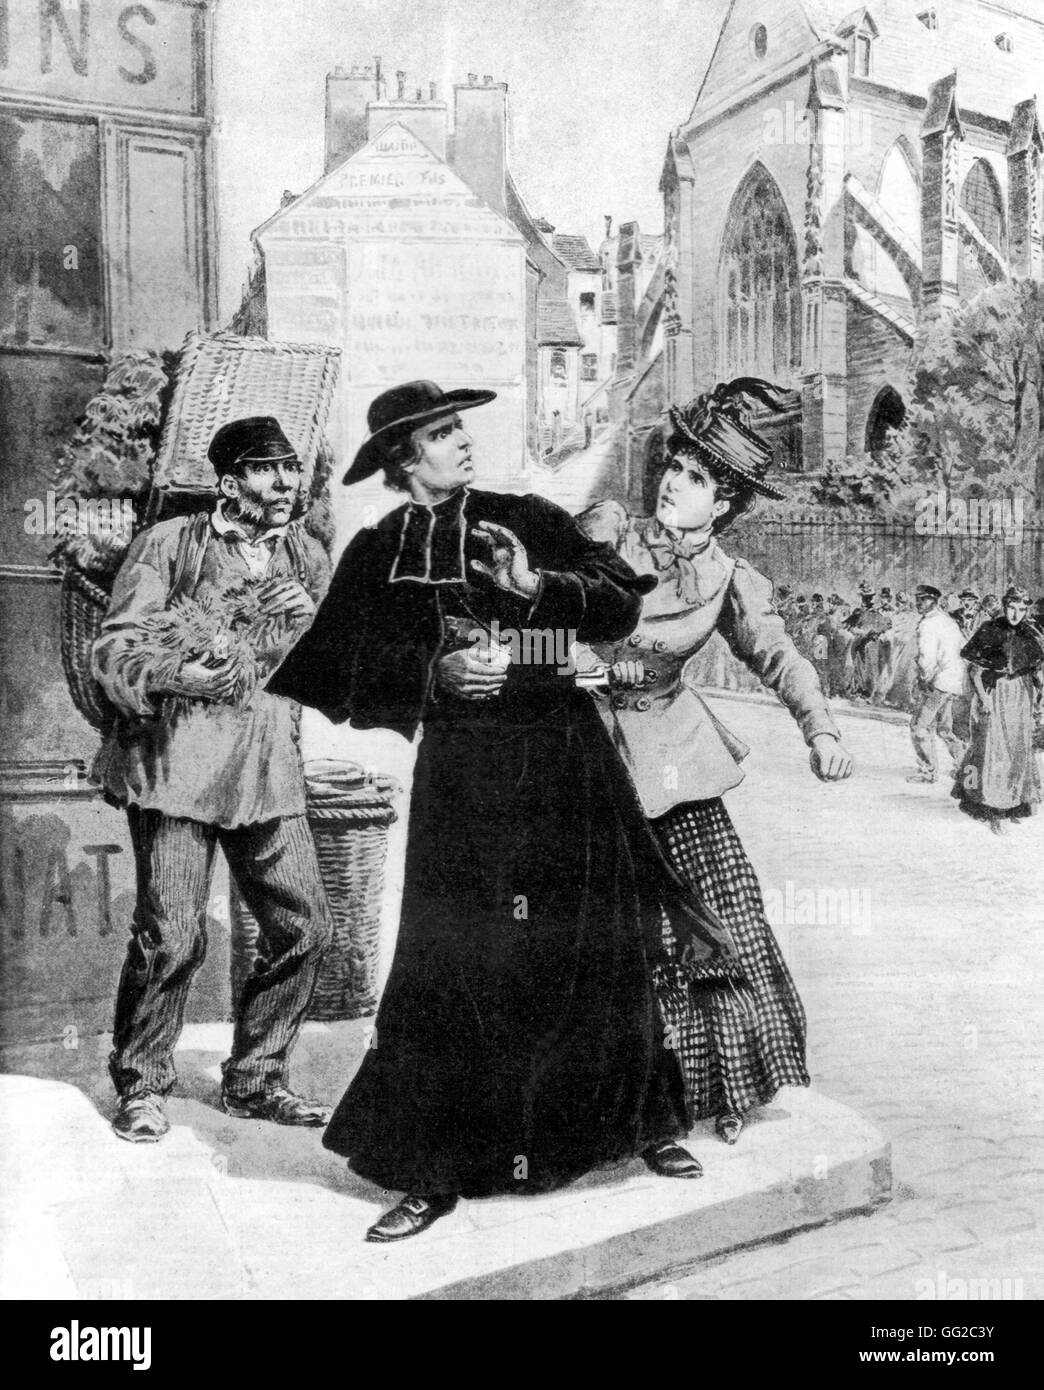 Anarchist assassination. A priester is being stabbed 1897 France Stock Photo